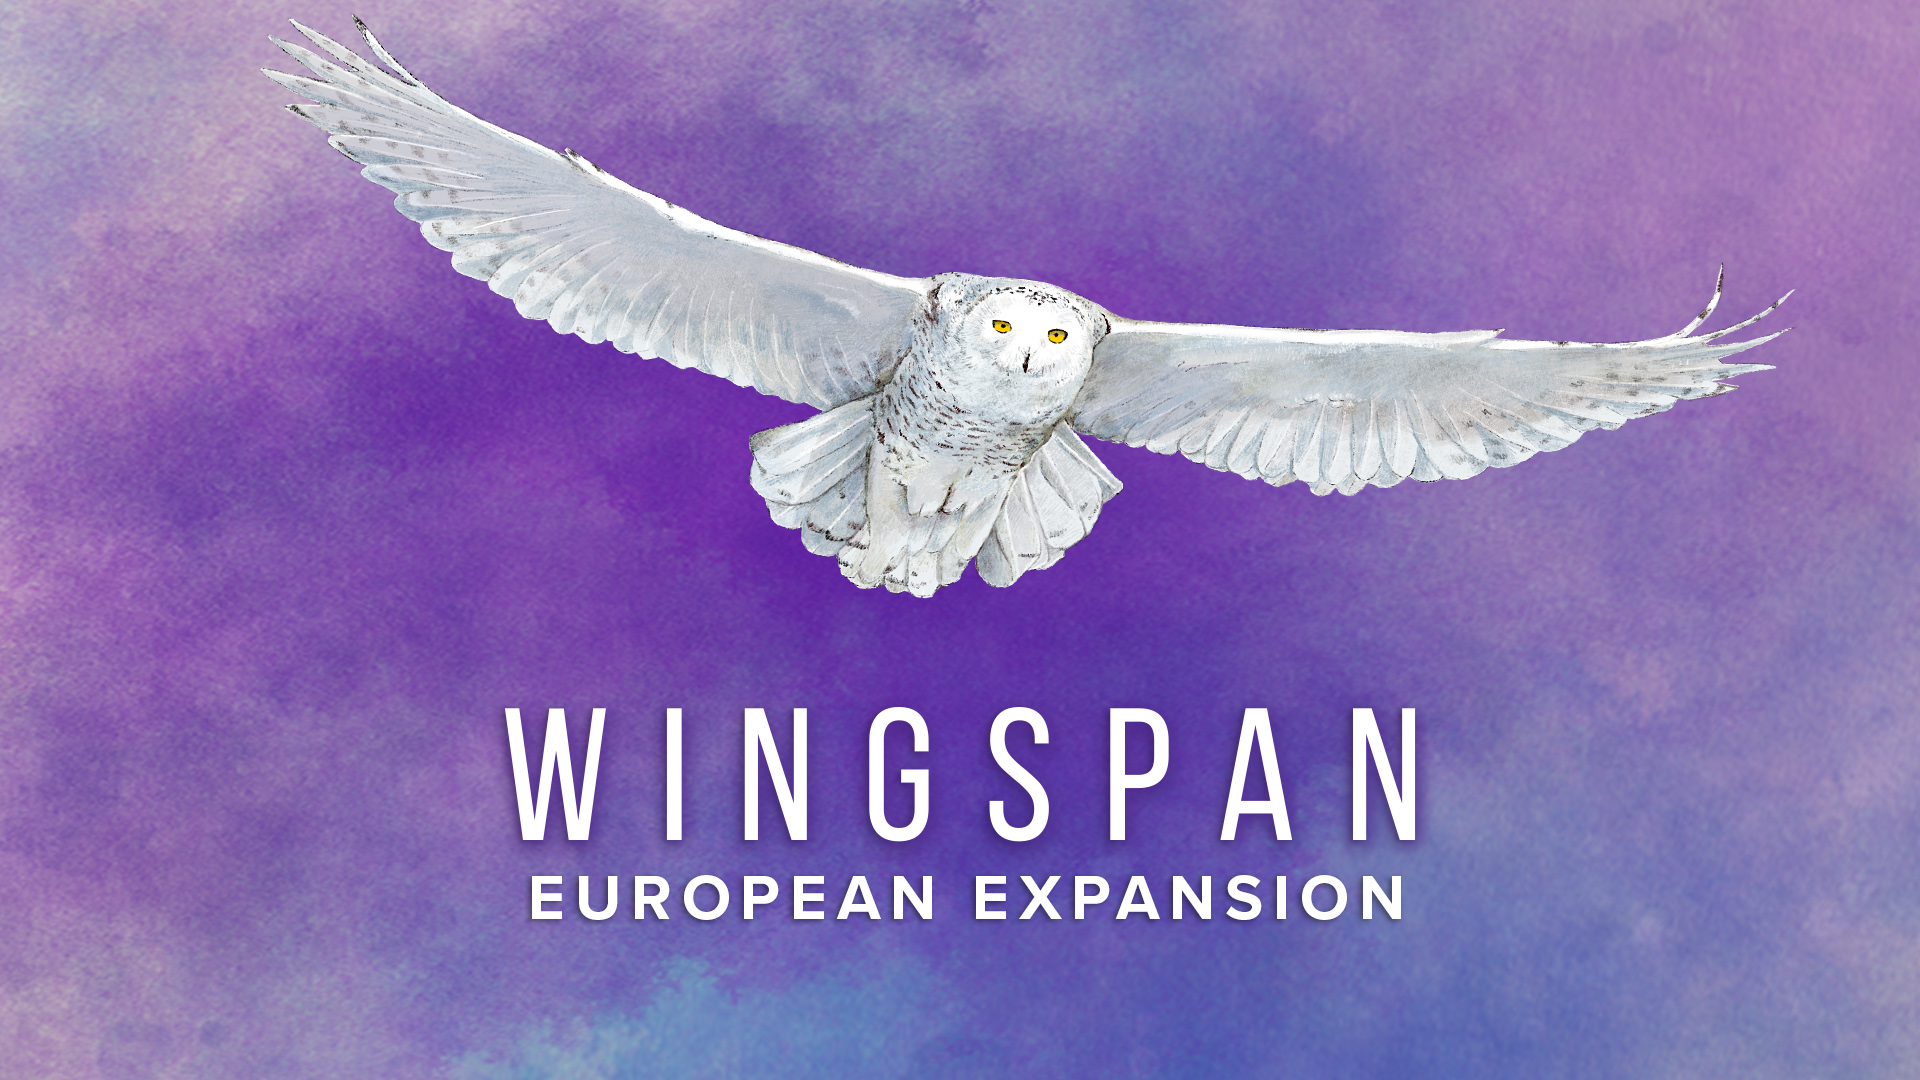 WINGSPAN: Oceania Expansion for Nintendo Switch - Nintendo